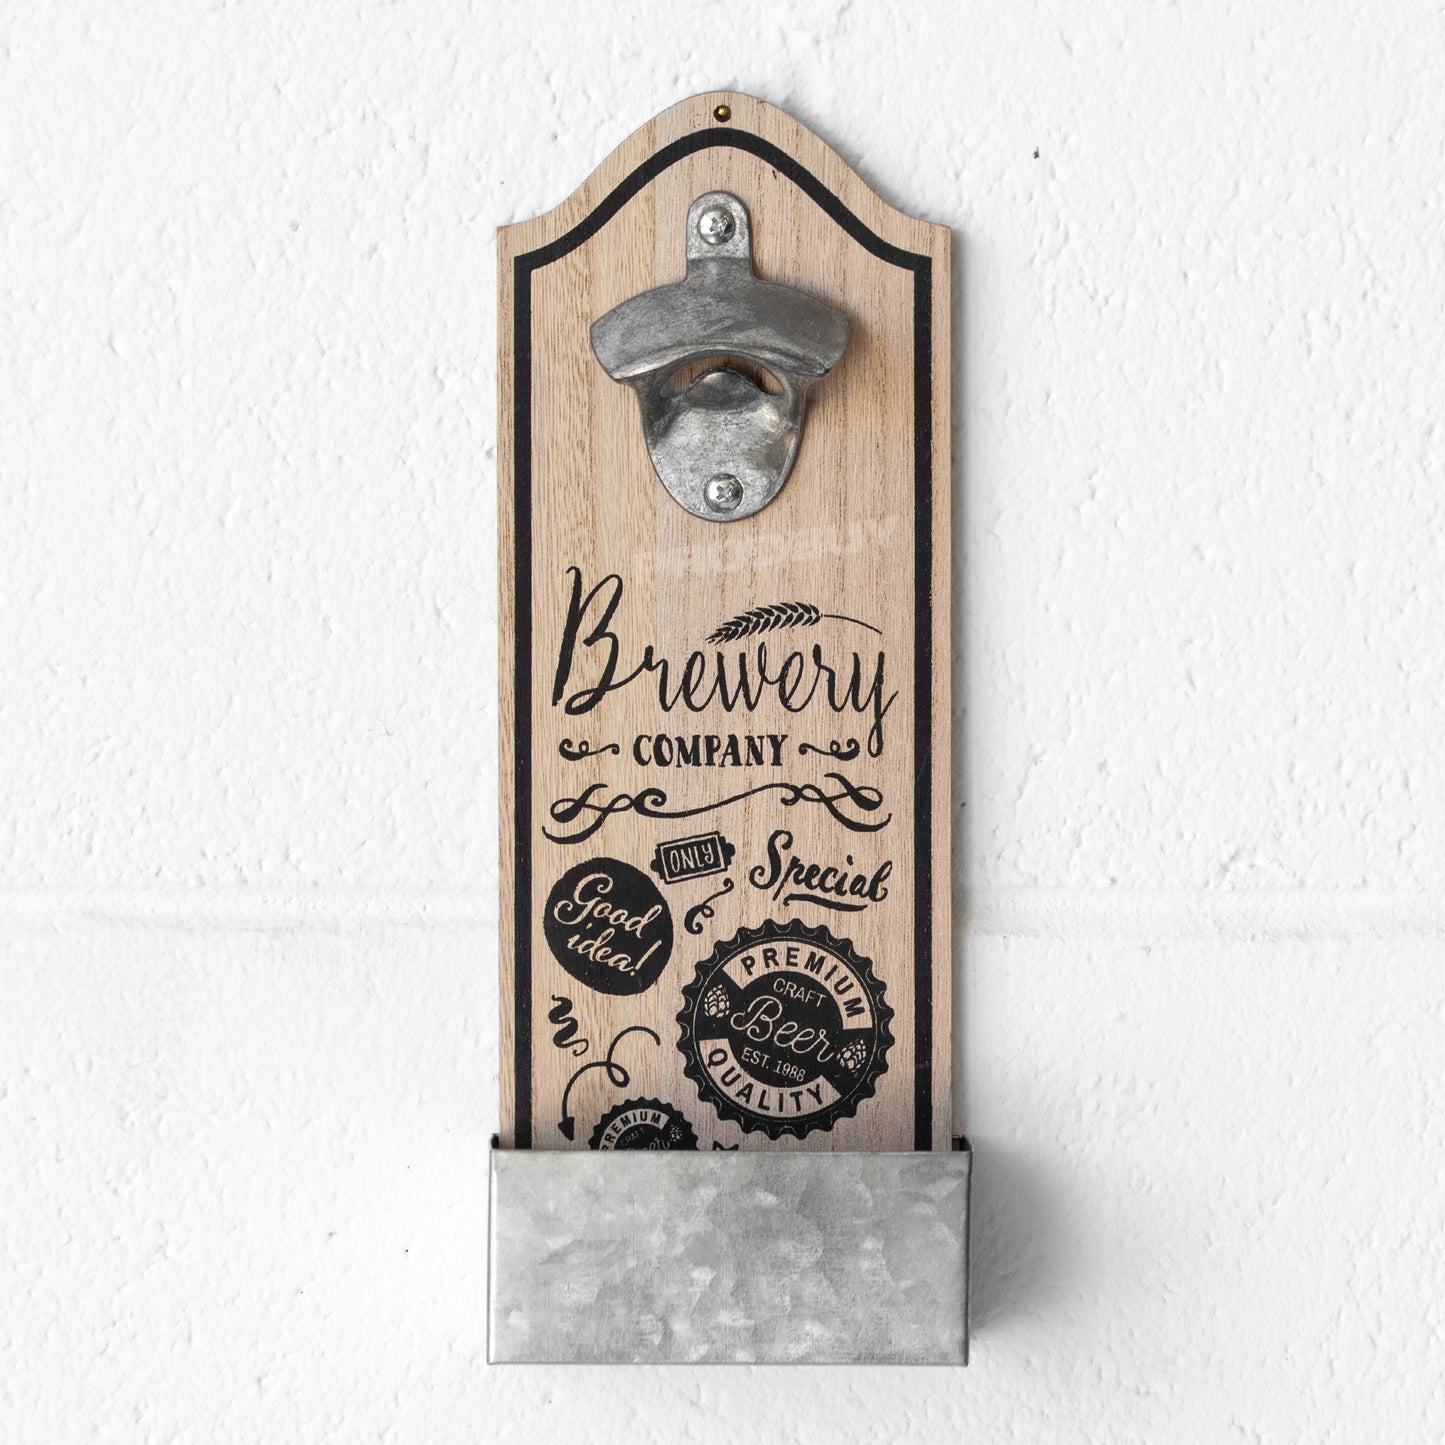 Wall Mounted Wooden Beer Bottle Opener with Cap Collector